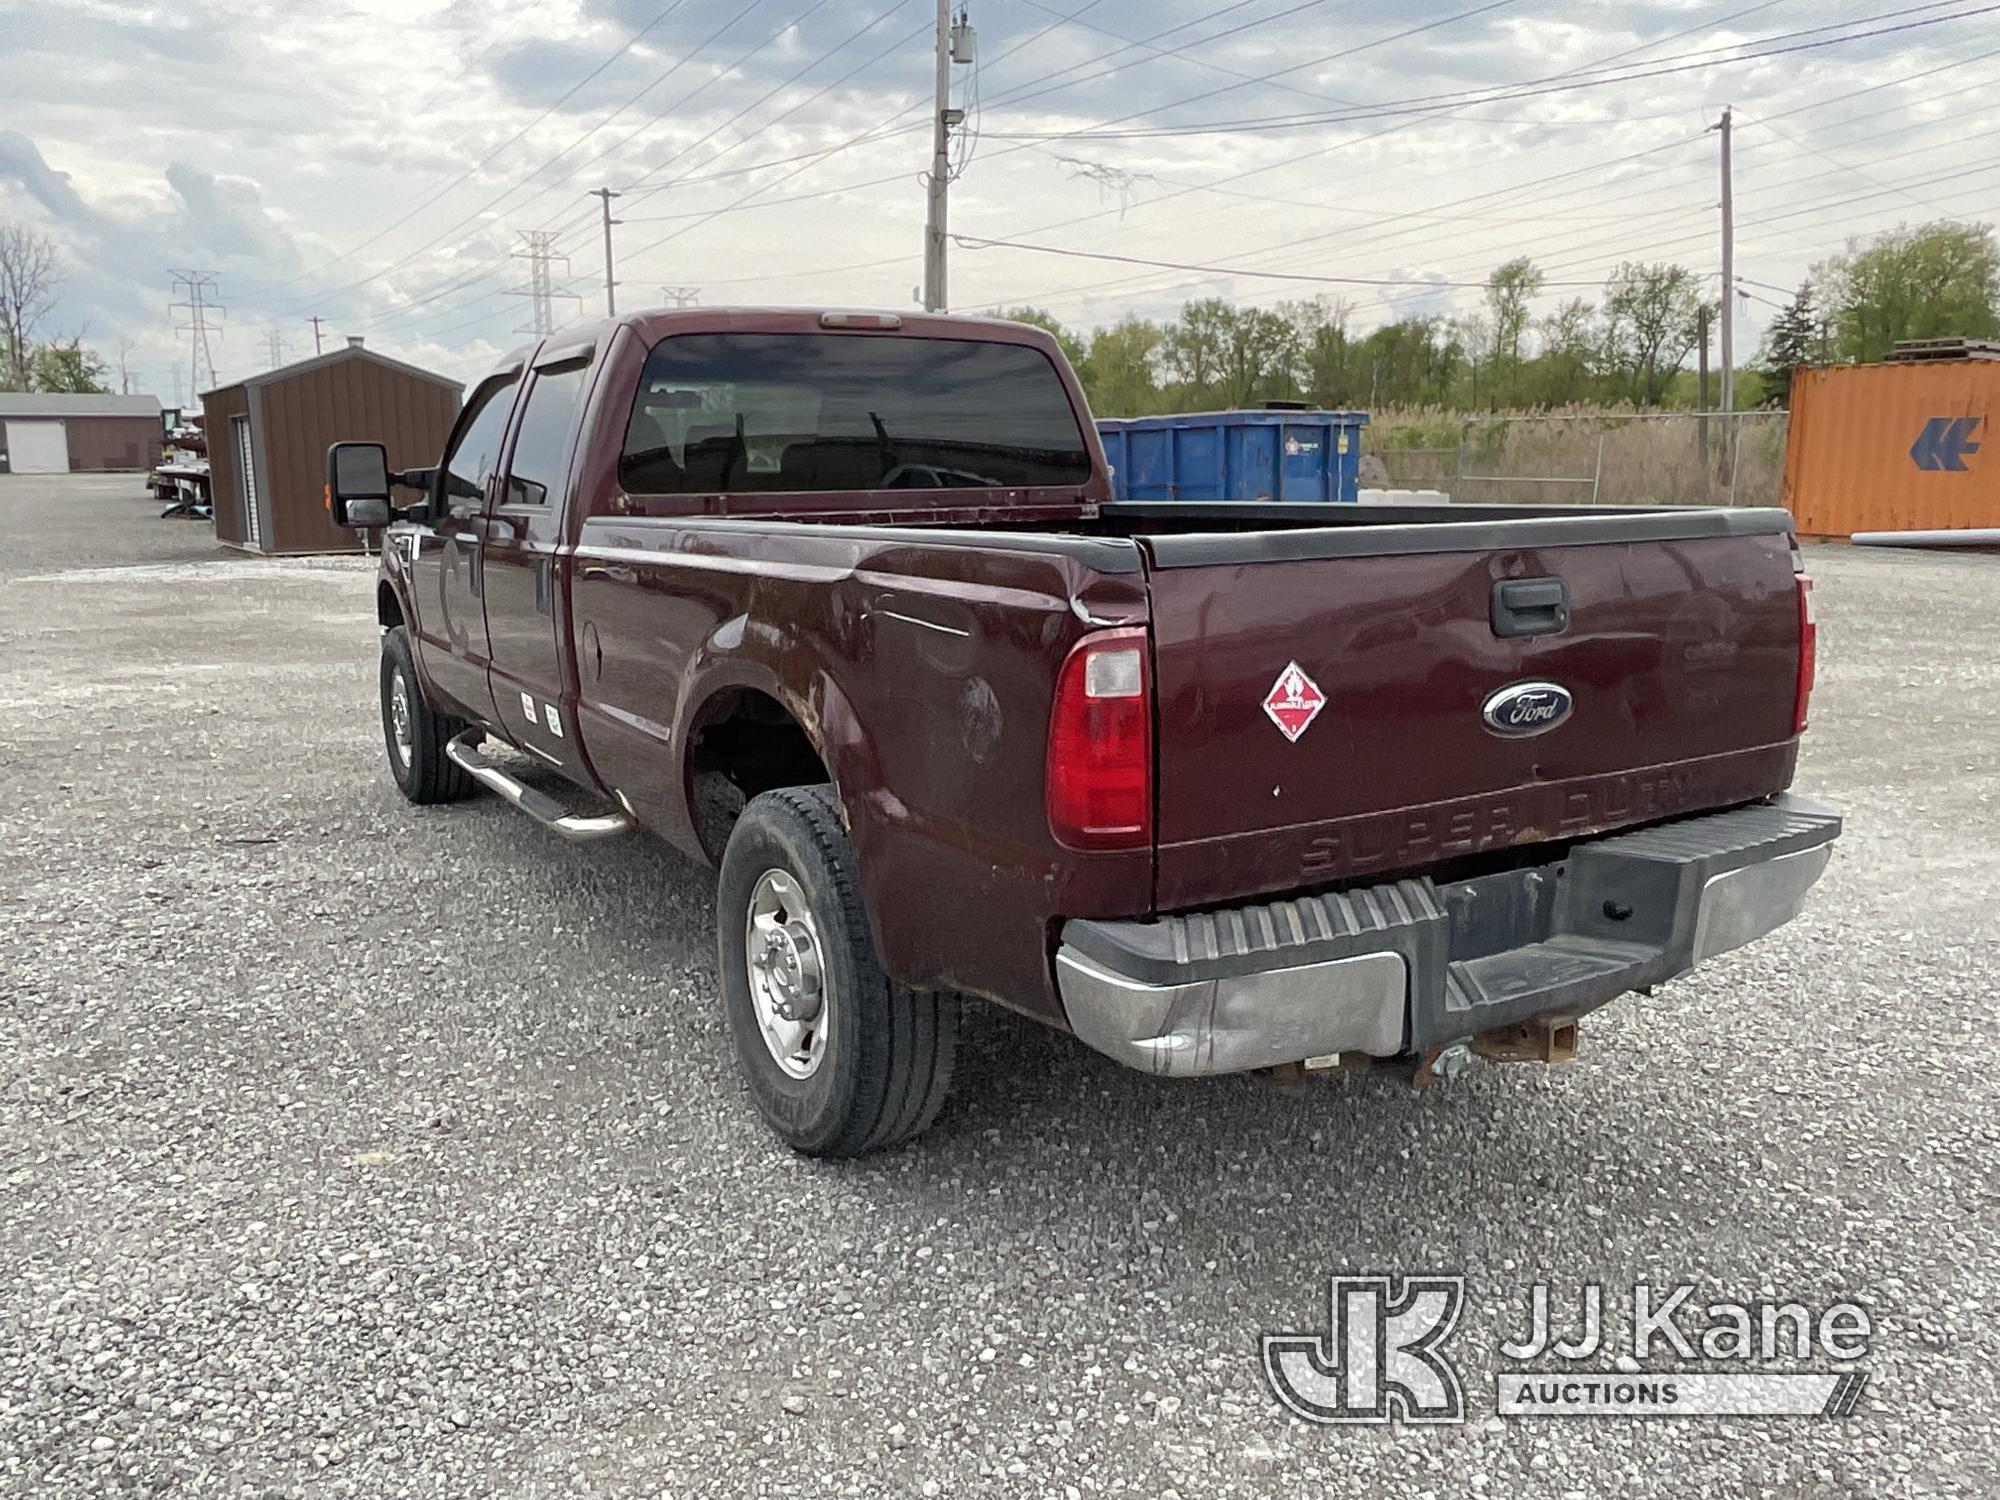 (Hobart, IN) 2010 Ford F250 4x4 Crew-Cab Pickup Truck Runs, Moves, Check Engine Light On) (Per Selle